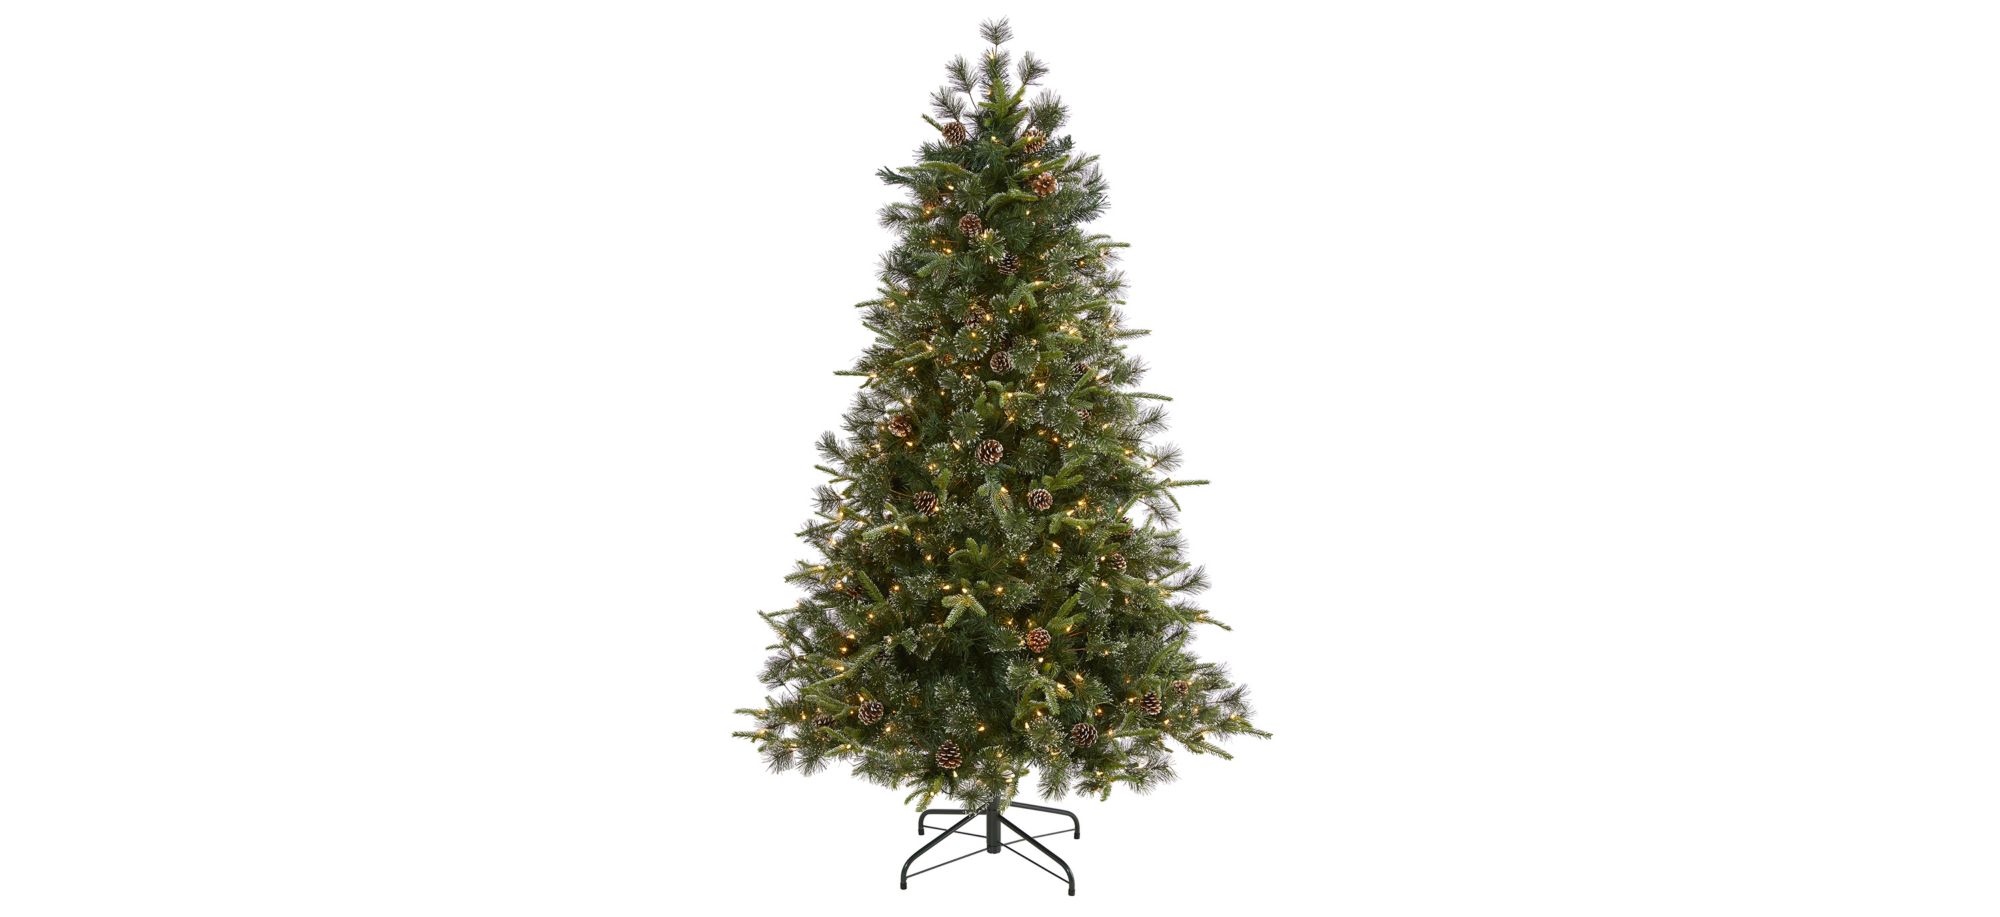 6ft. Pre-Lit Snowed Tipped Clermont Mixed Pine Artificial Christmas Tree in Green by Bellanest